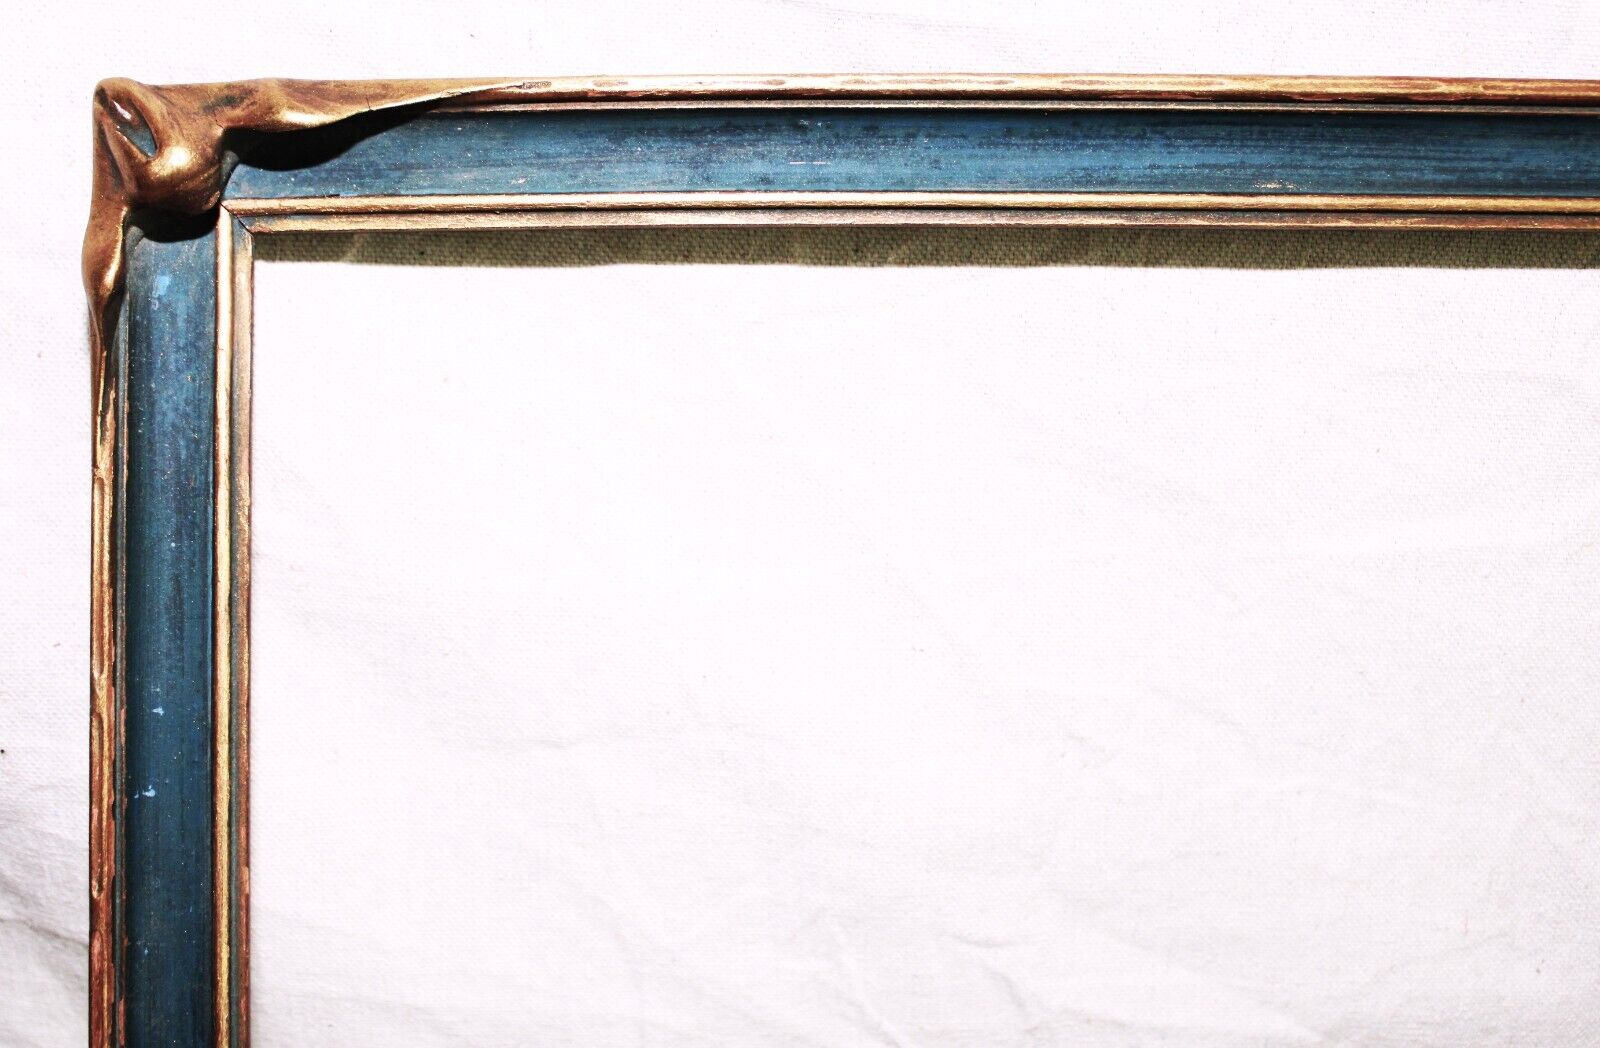 ANTIQUE FITS 10 X 13 PIE CRUST PICTURE FRAME BATWING ARTS CRAFTS GOLD BLUE WOOD